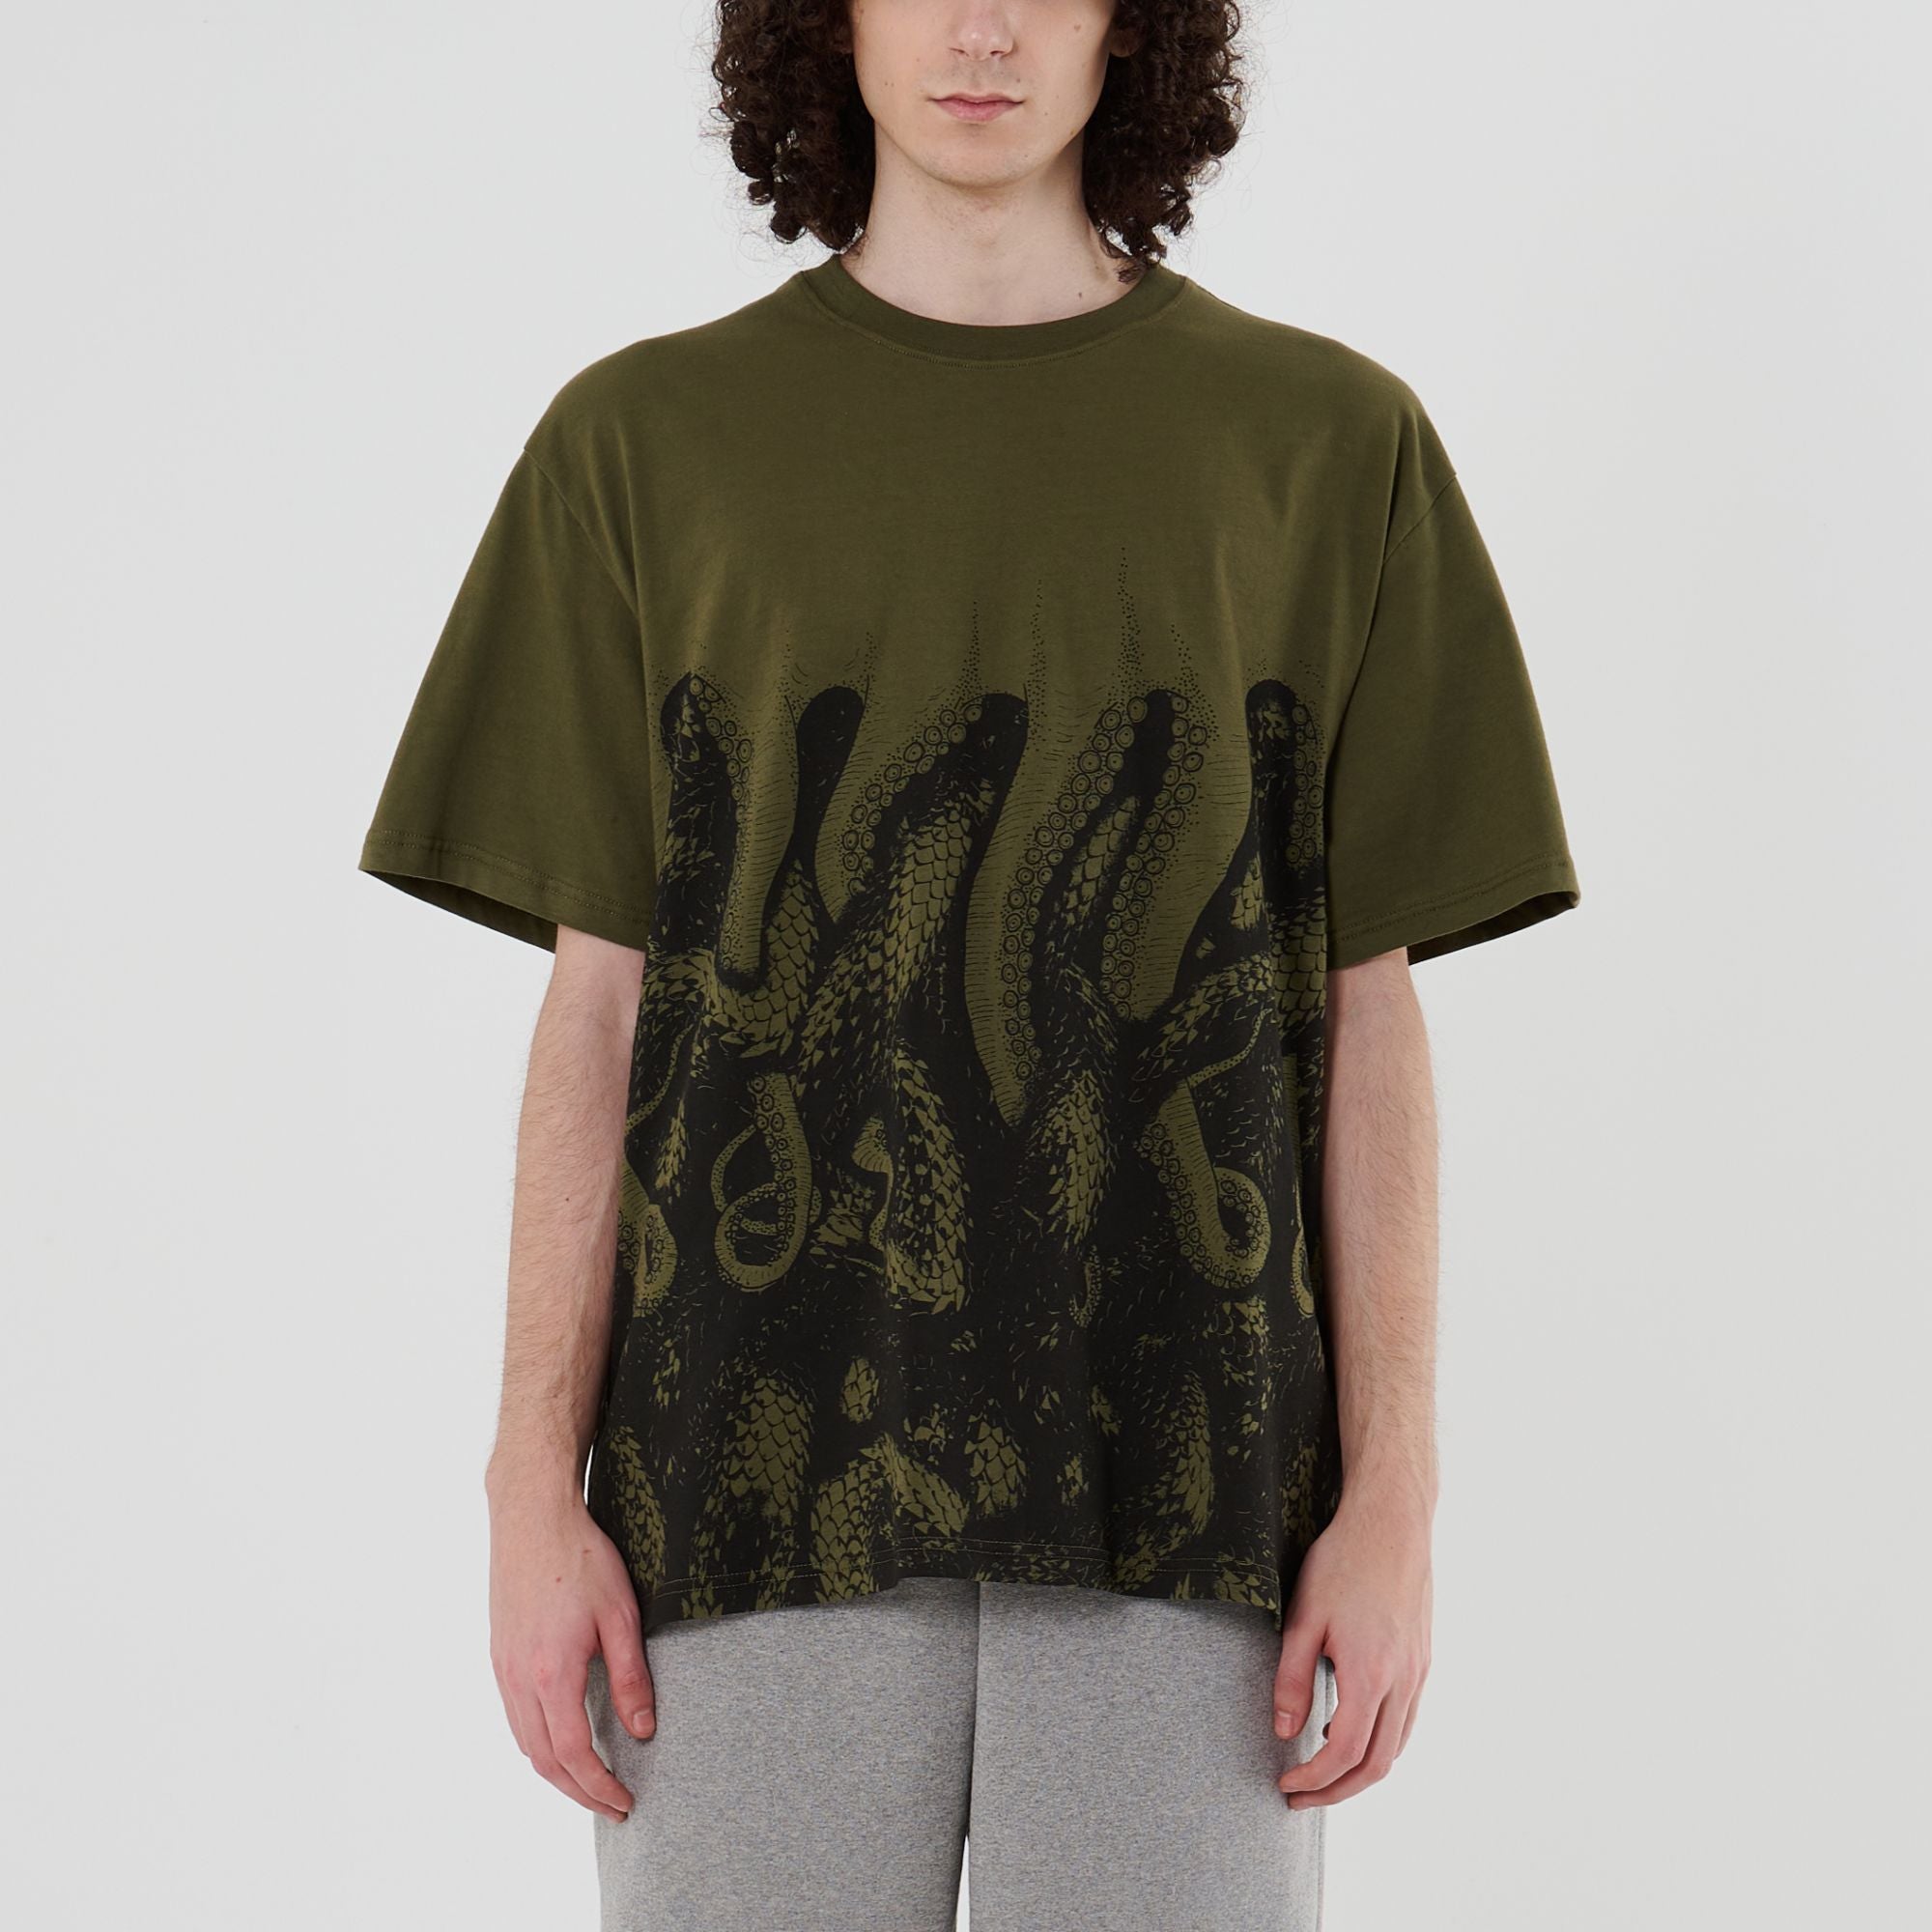 Octopus Snakes Tee (Army)